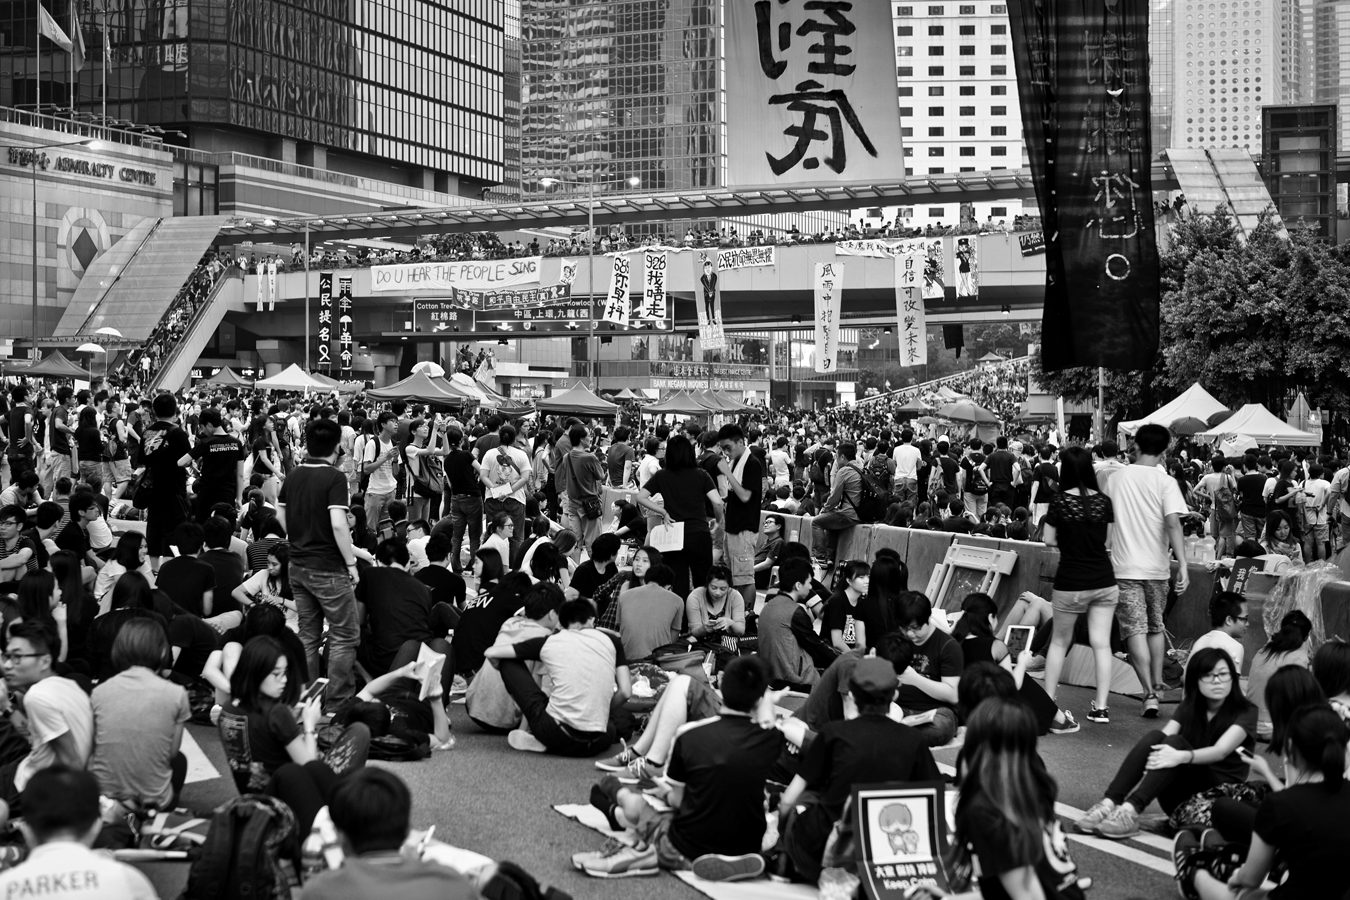 Anti-triad legislations in Hong Kong: issues, problems and development